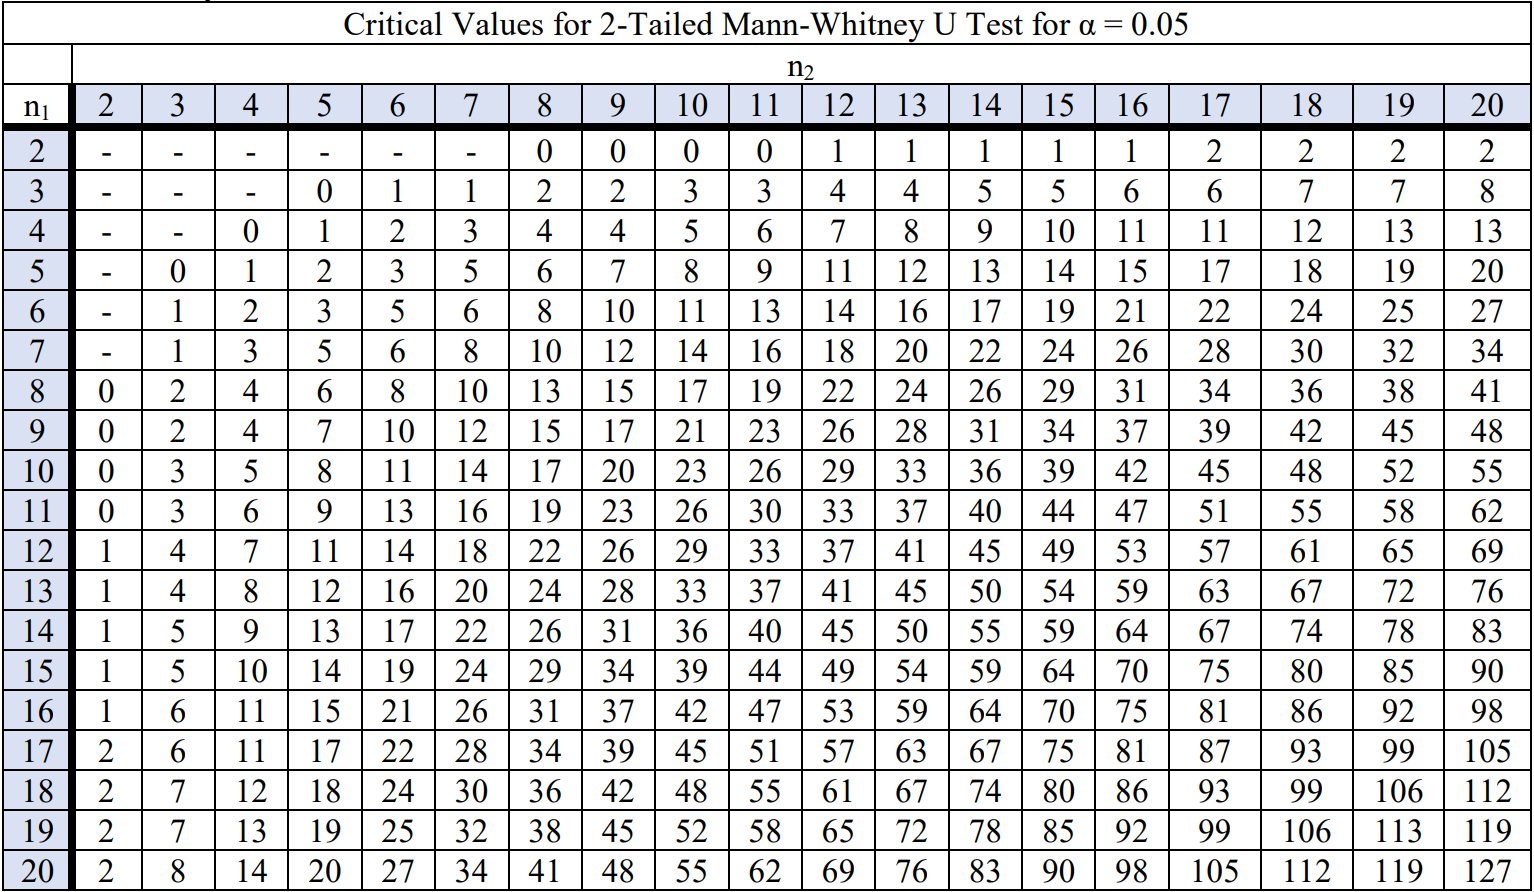 Table of critical values for 2-tailed Mann-Whitney U Test for alpha = 0.05.